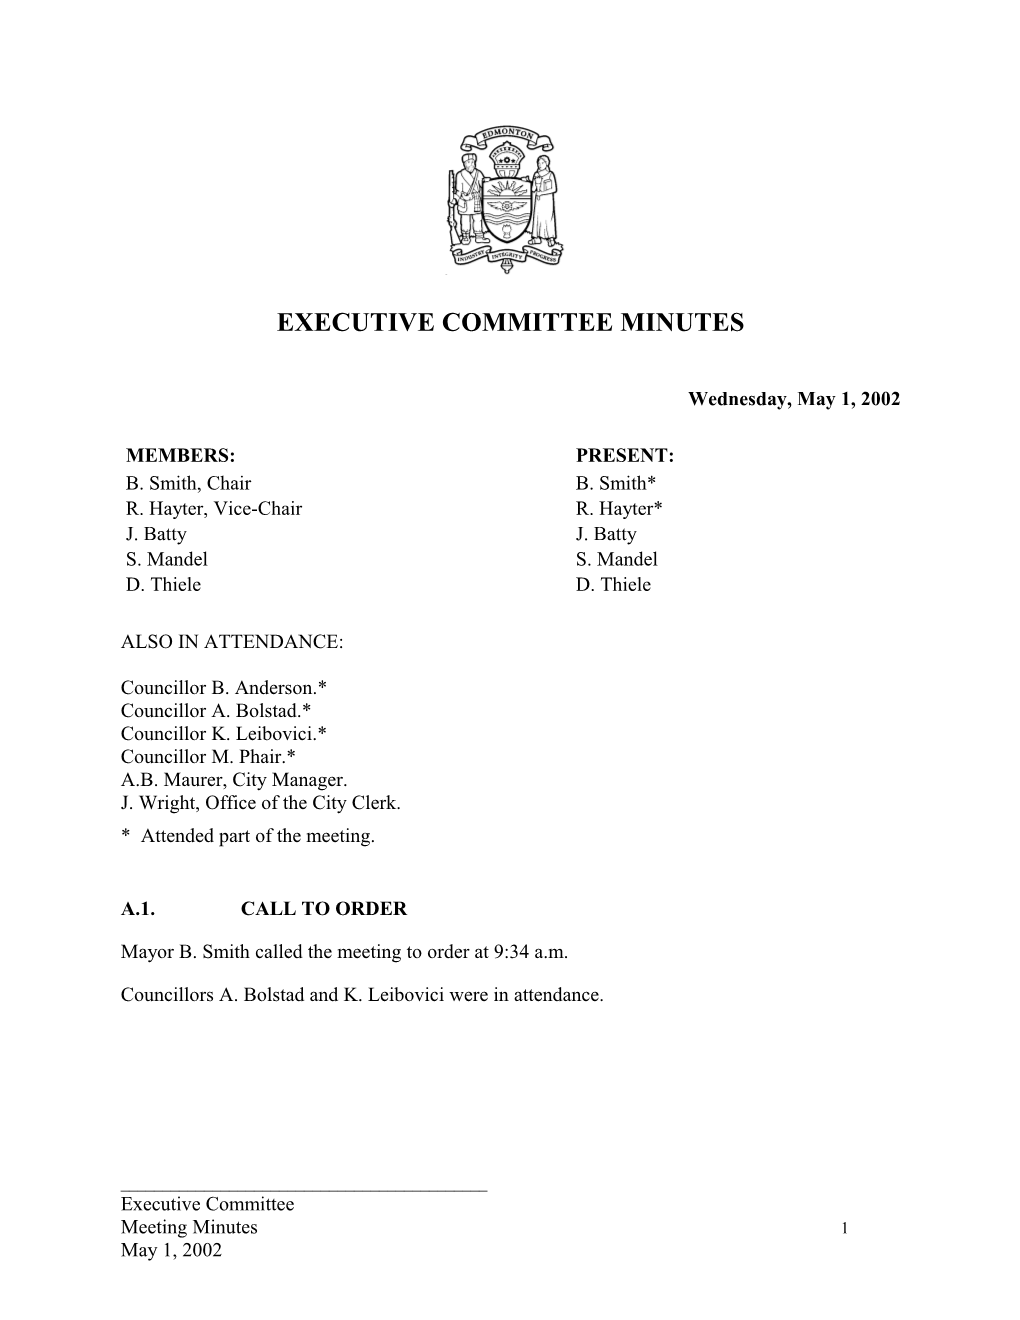 Minutes for Executive Committee May 1, 2002 Meeting